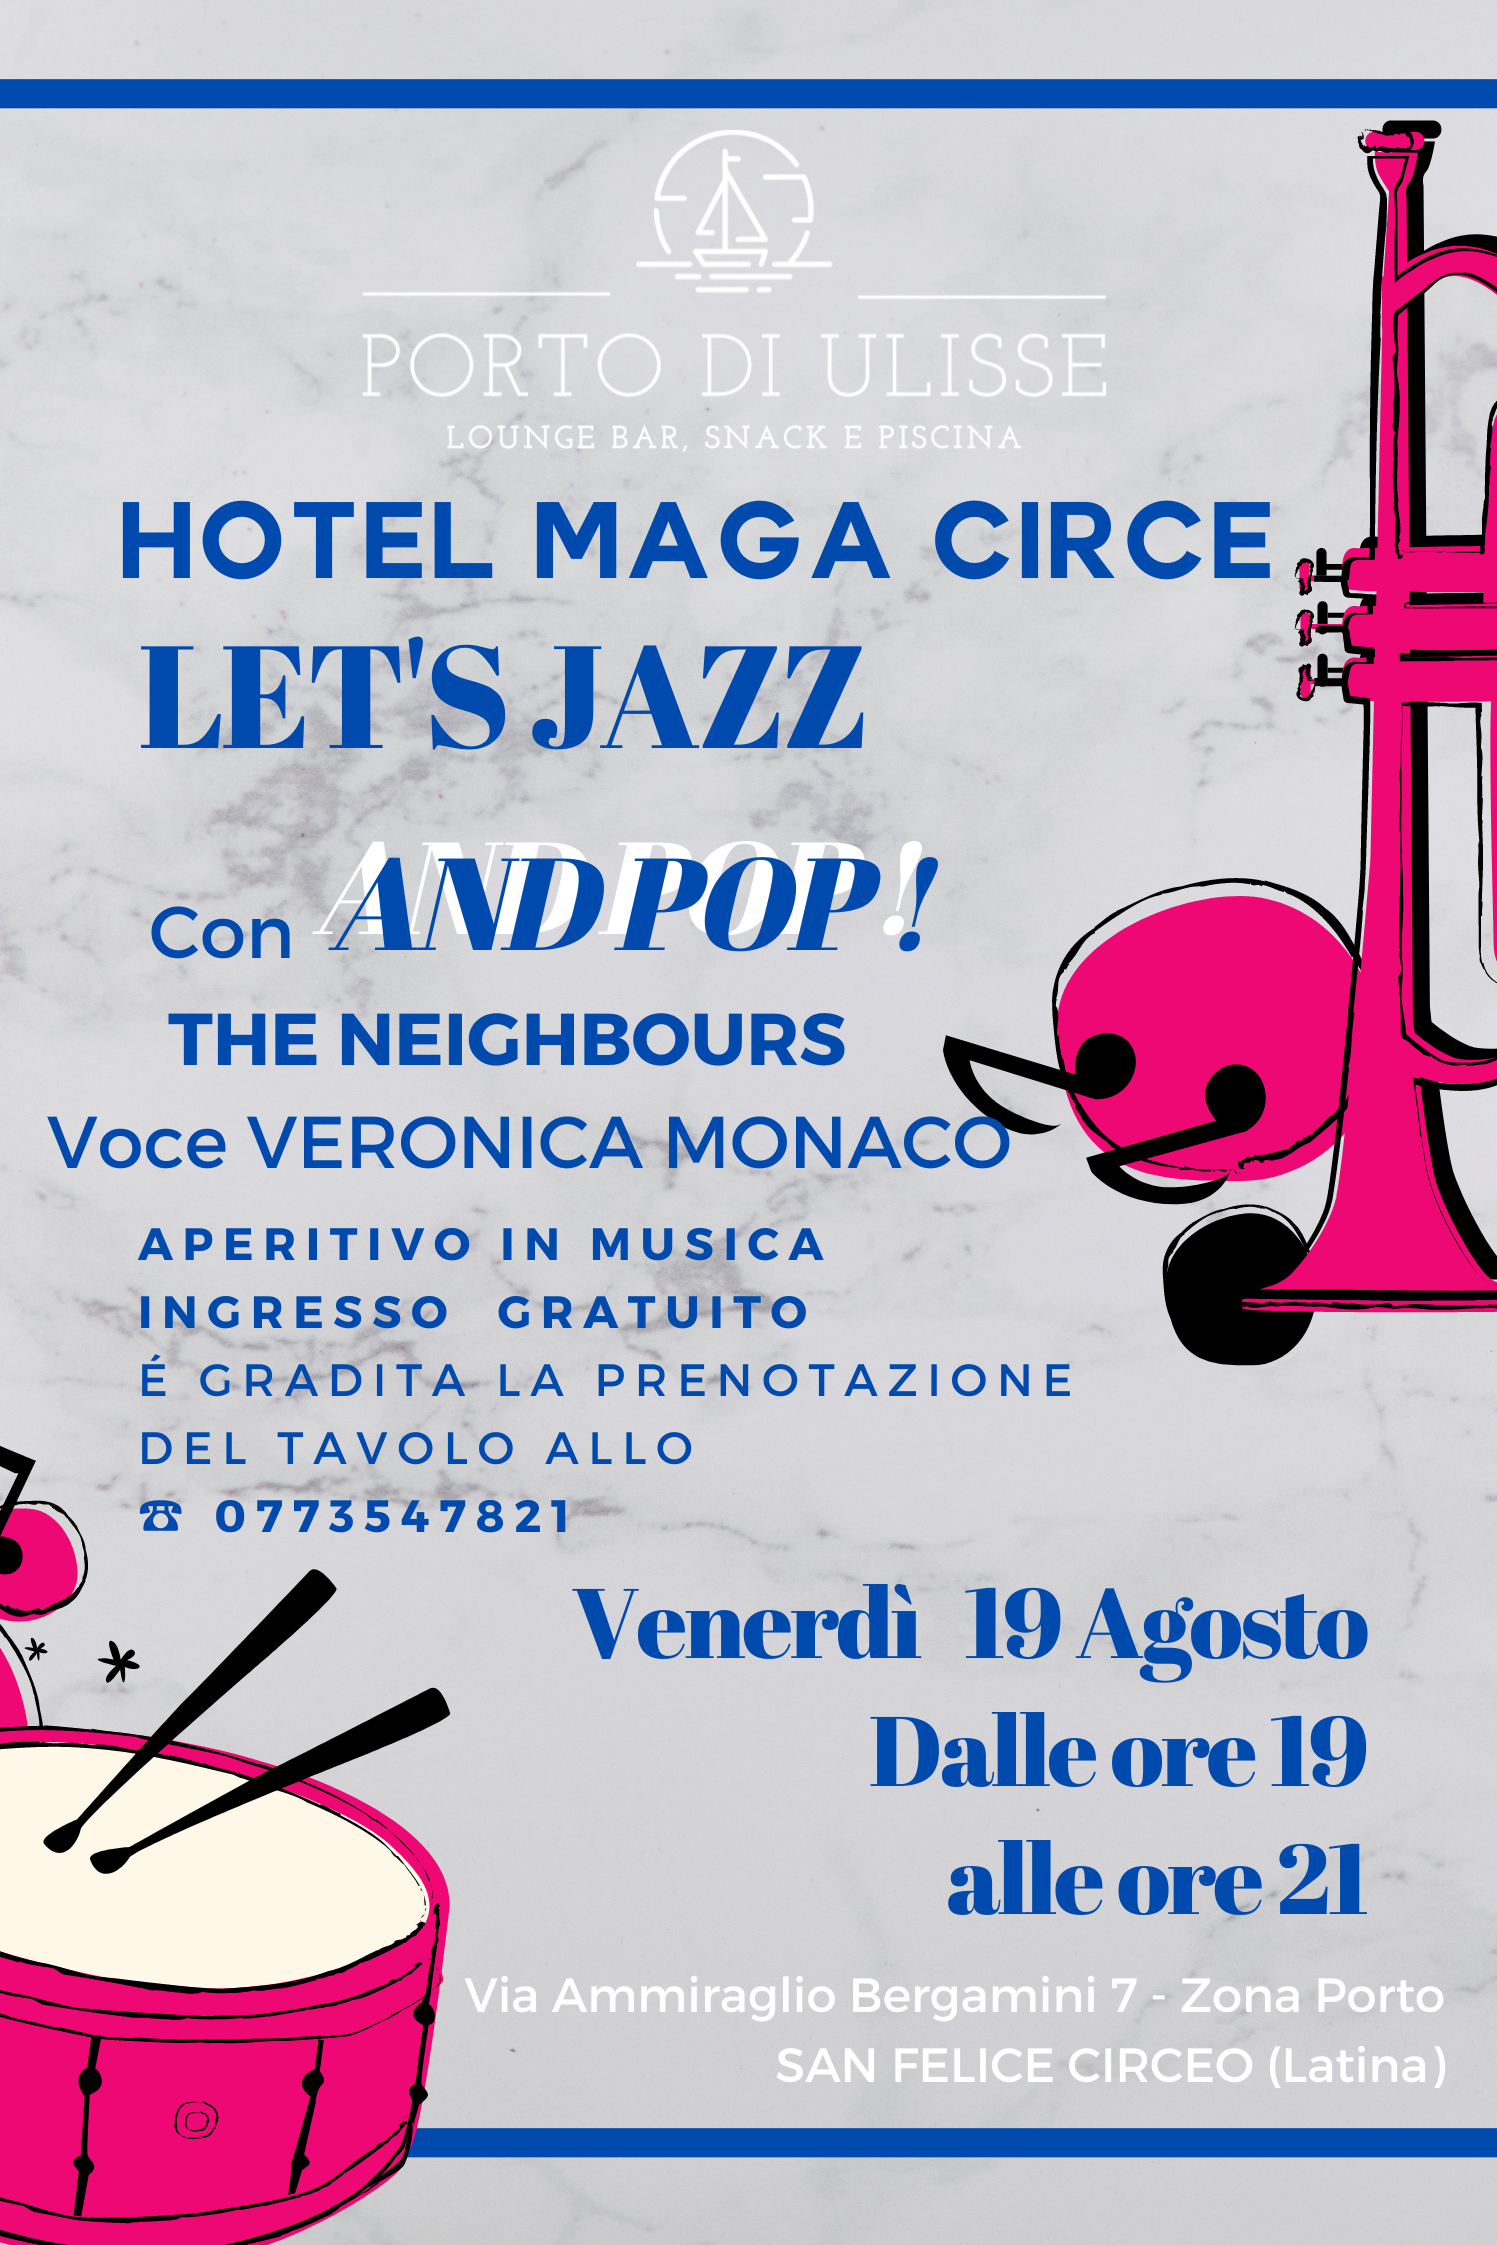 19 Agosto 2022 – LETS’S JAZZ con AND POP!